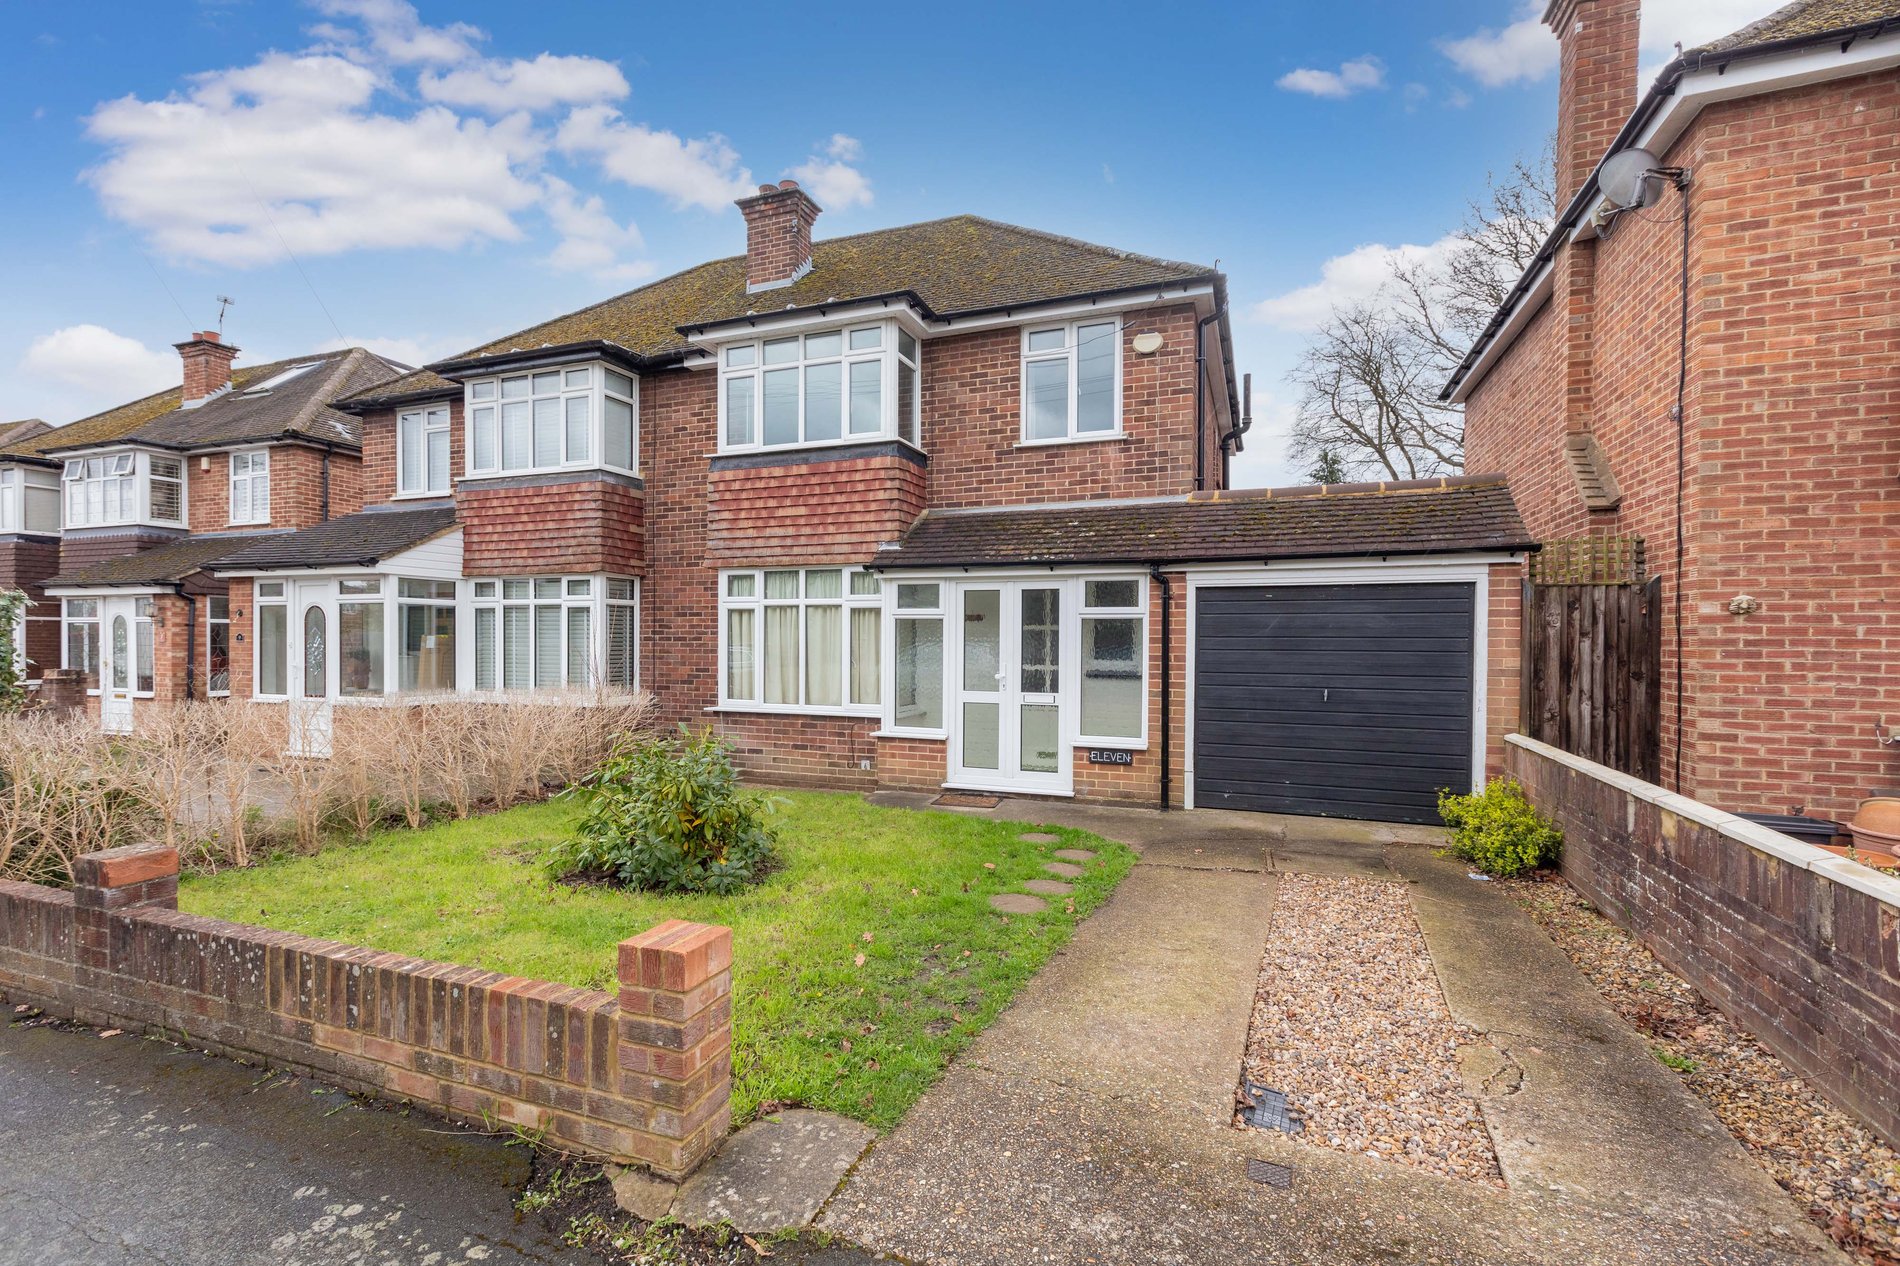 3 bed semi-detached house for sale in Coopers Row, Iver Heath - Property Image 1